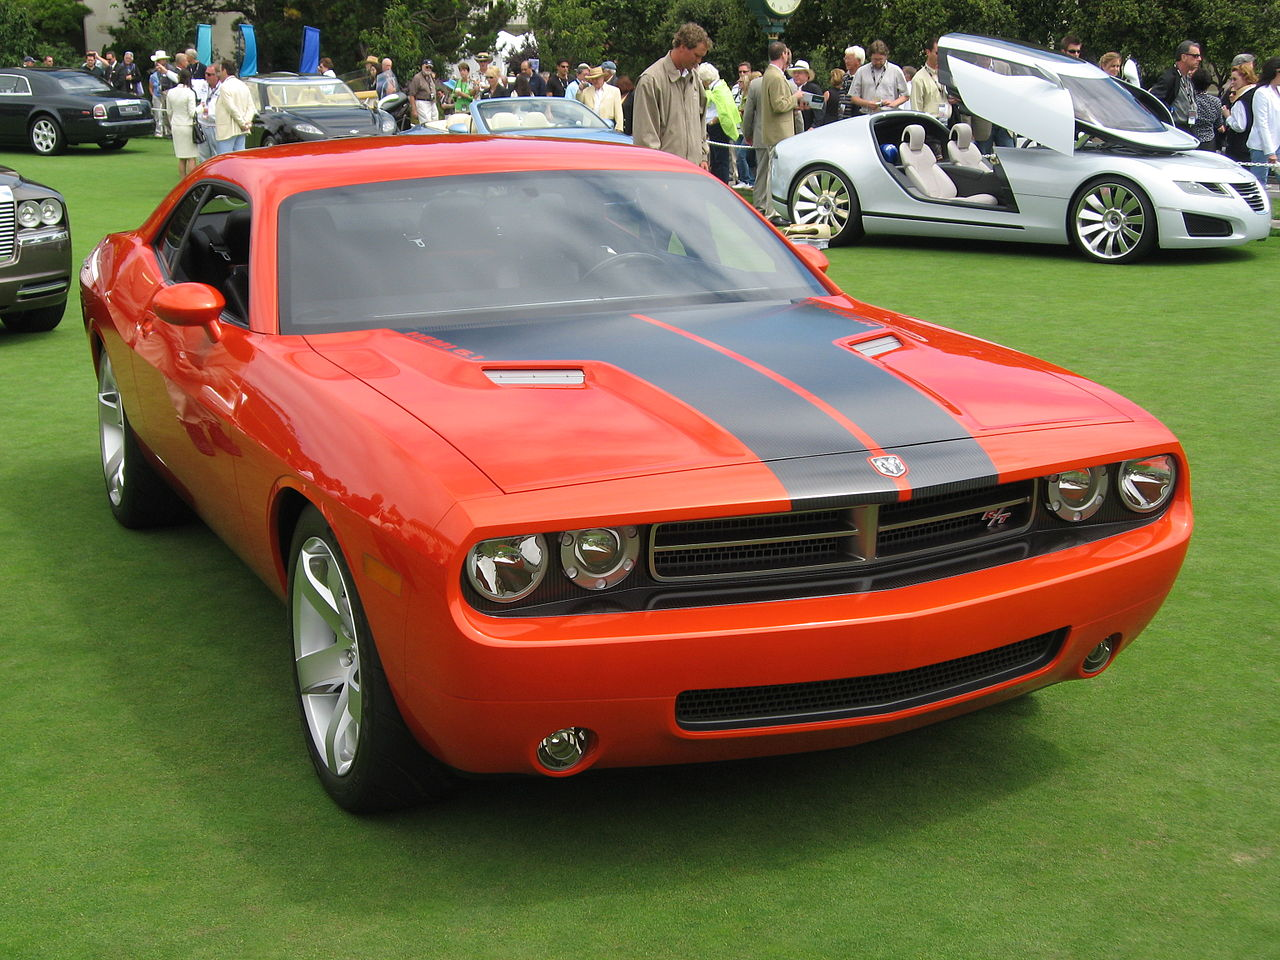 Modern 2008 Dodge Challenger with its retro styling, tying it back to the look of the first generation with big wheels, small side windows, and an aggressive stance. Sitting on grass. 